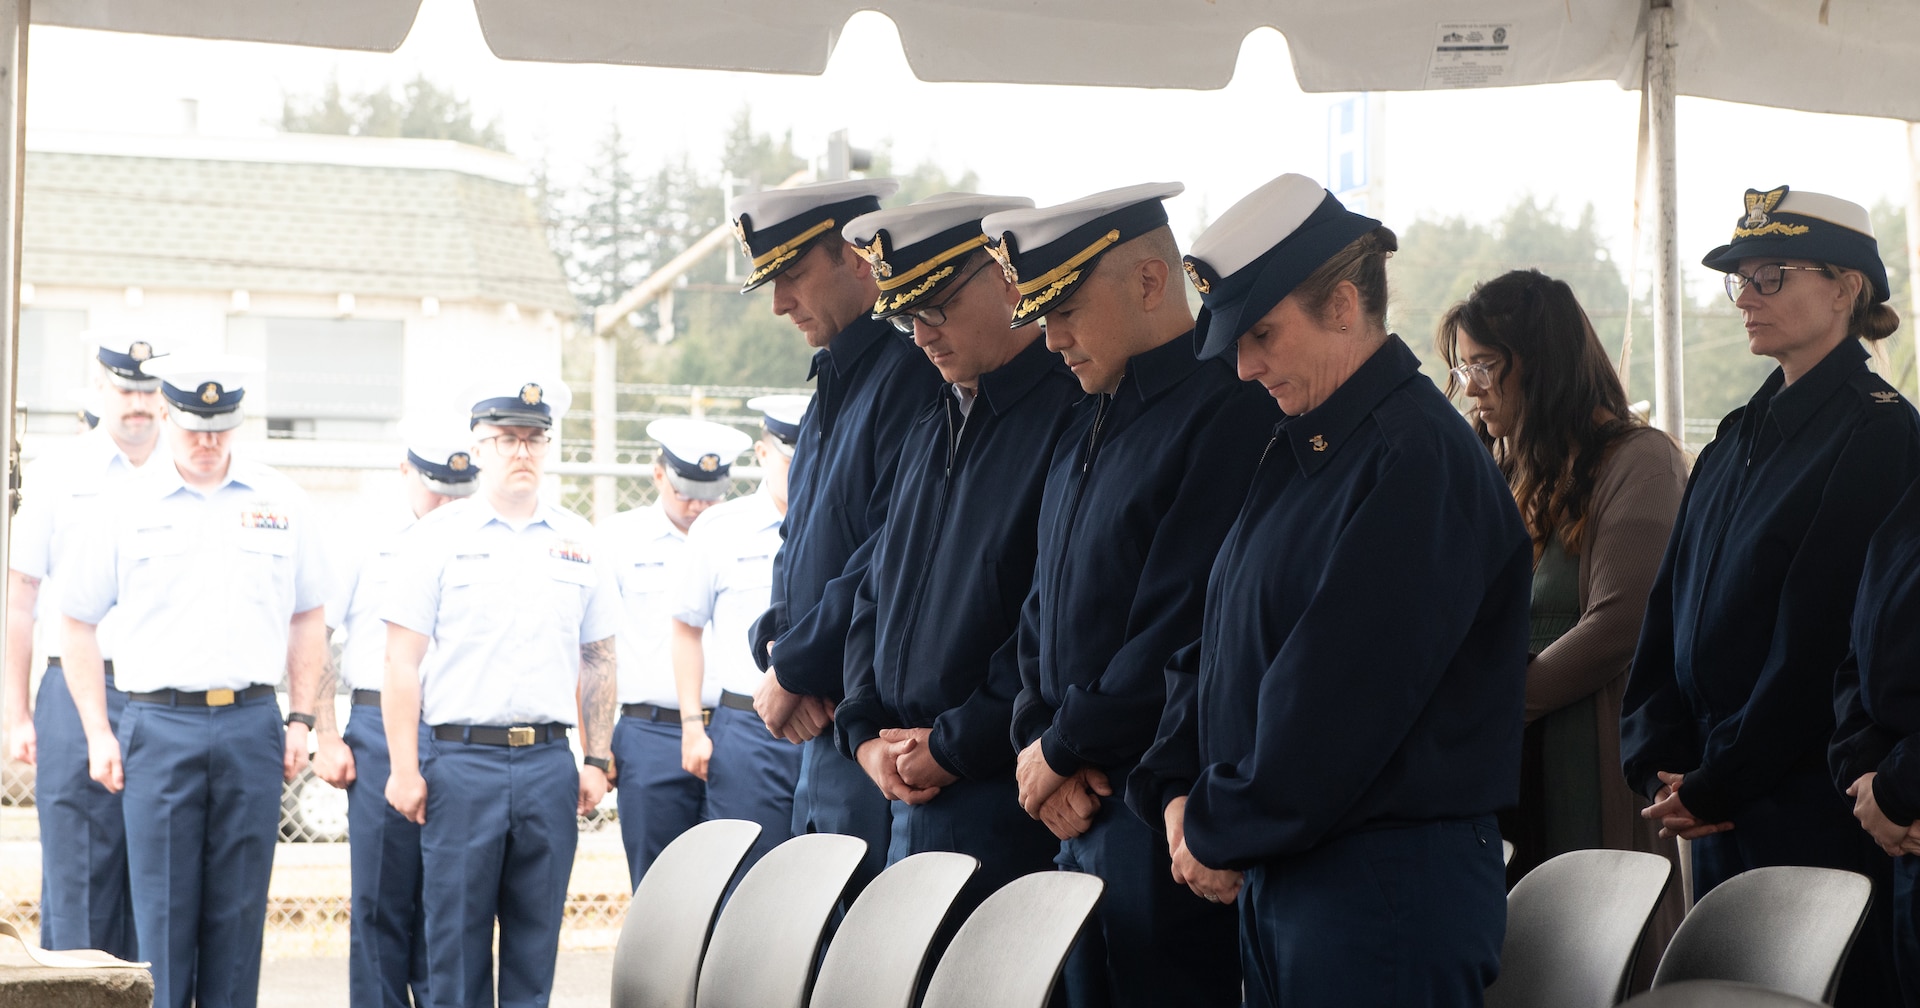 The crew of the USCGC Orcas holds a decommissioning ceremony for the cutter in Coos Bay, Oregon, Apr. 23, 2024. Orcas was commissioned in 1989 and spent all 35 years of its service in Coos Bay. (U.S. Coast Guard Photo by Petty Officer 3rd Class William Kirk)